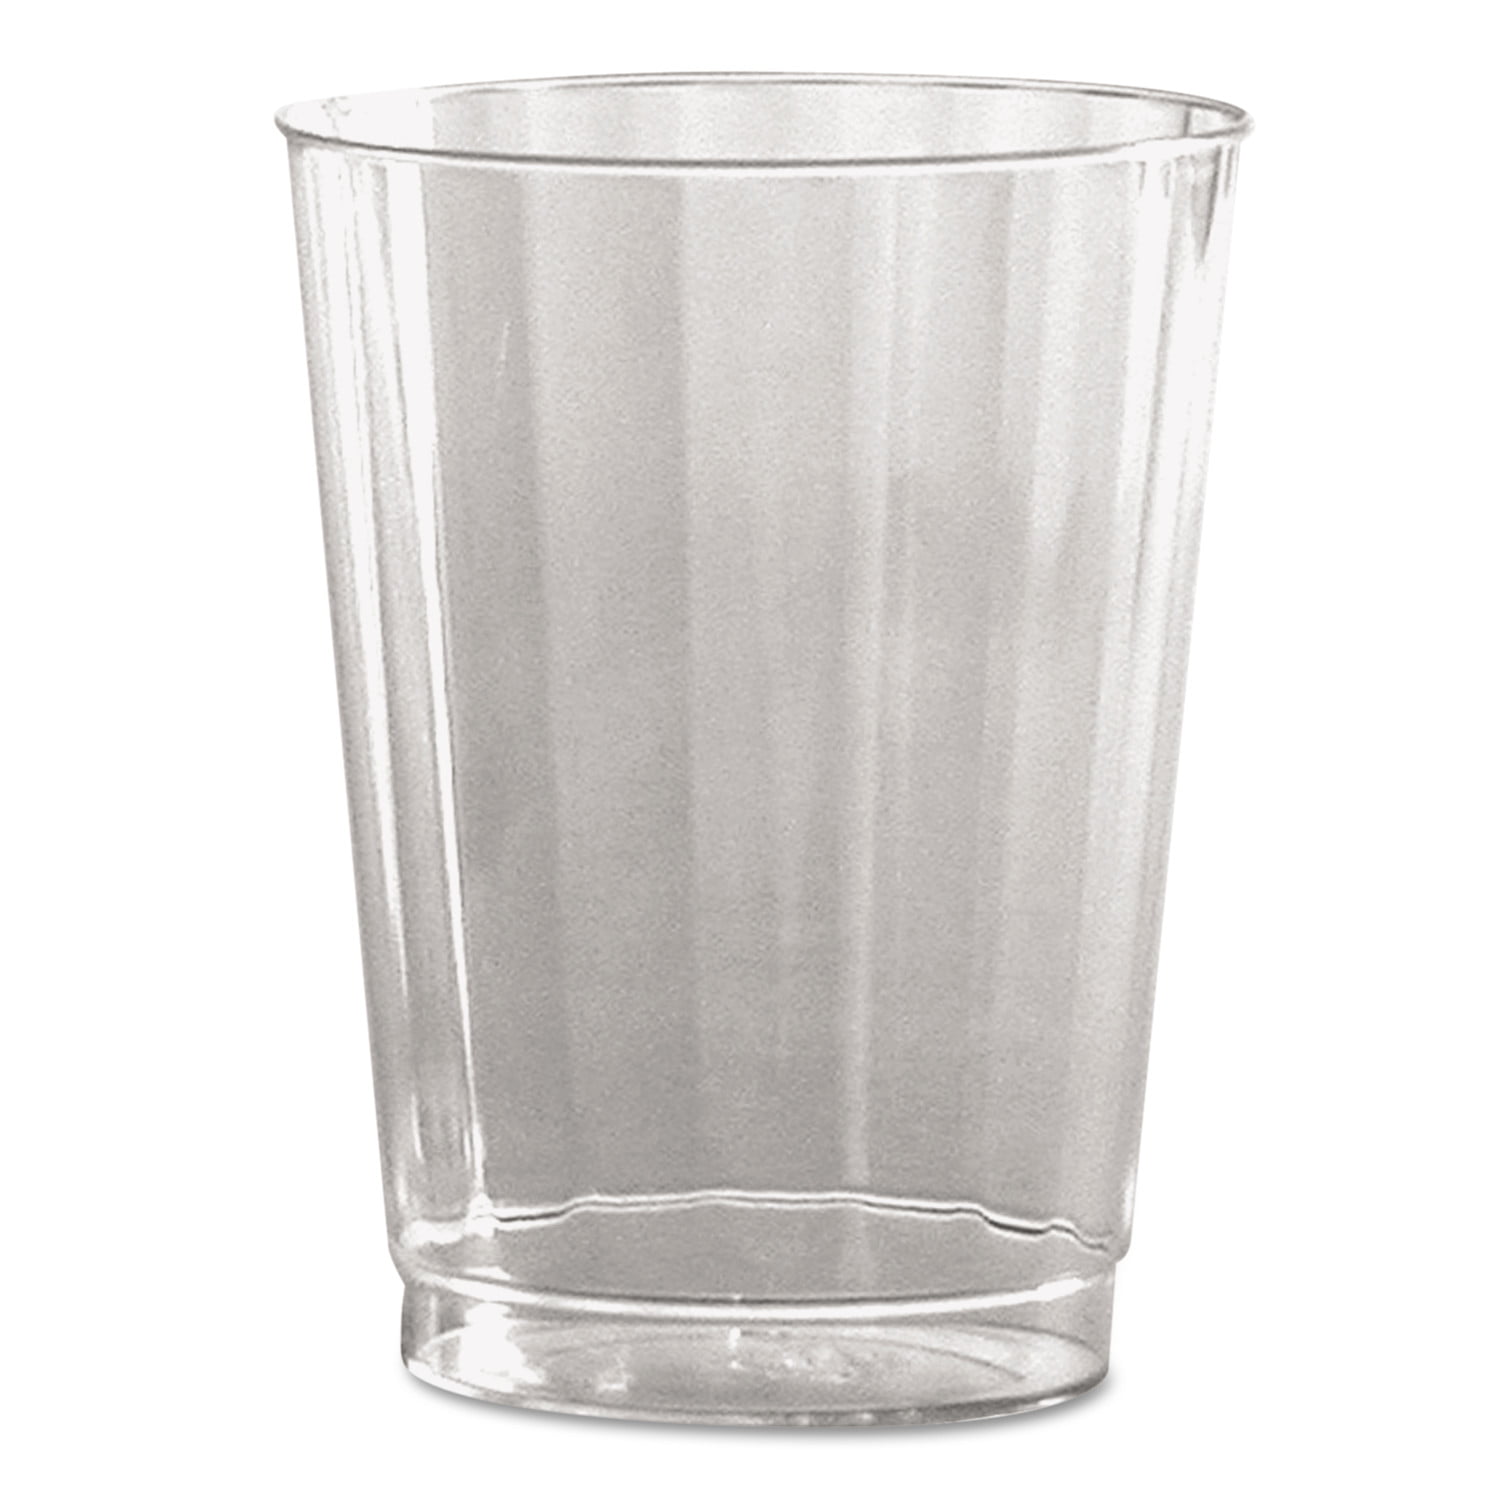 Details about   WNA Smooth Wall Polystyrene Squat Tumbler Clear 9 oz.500/Case 